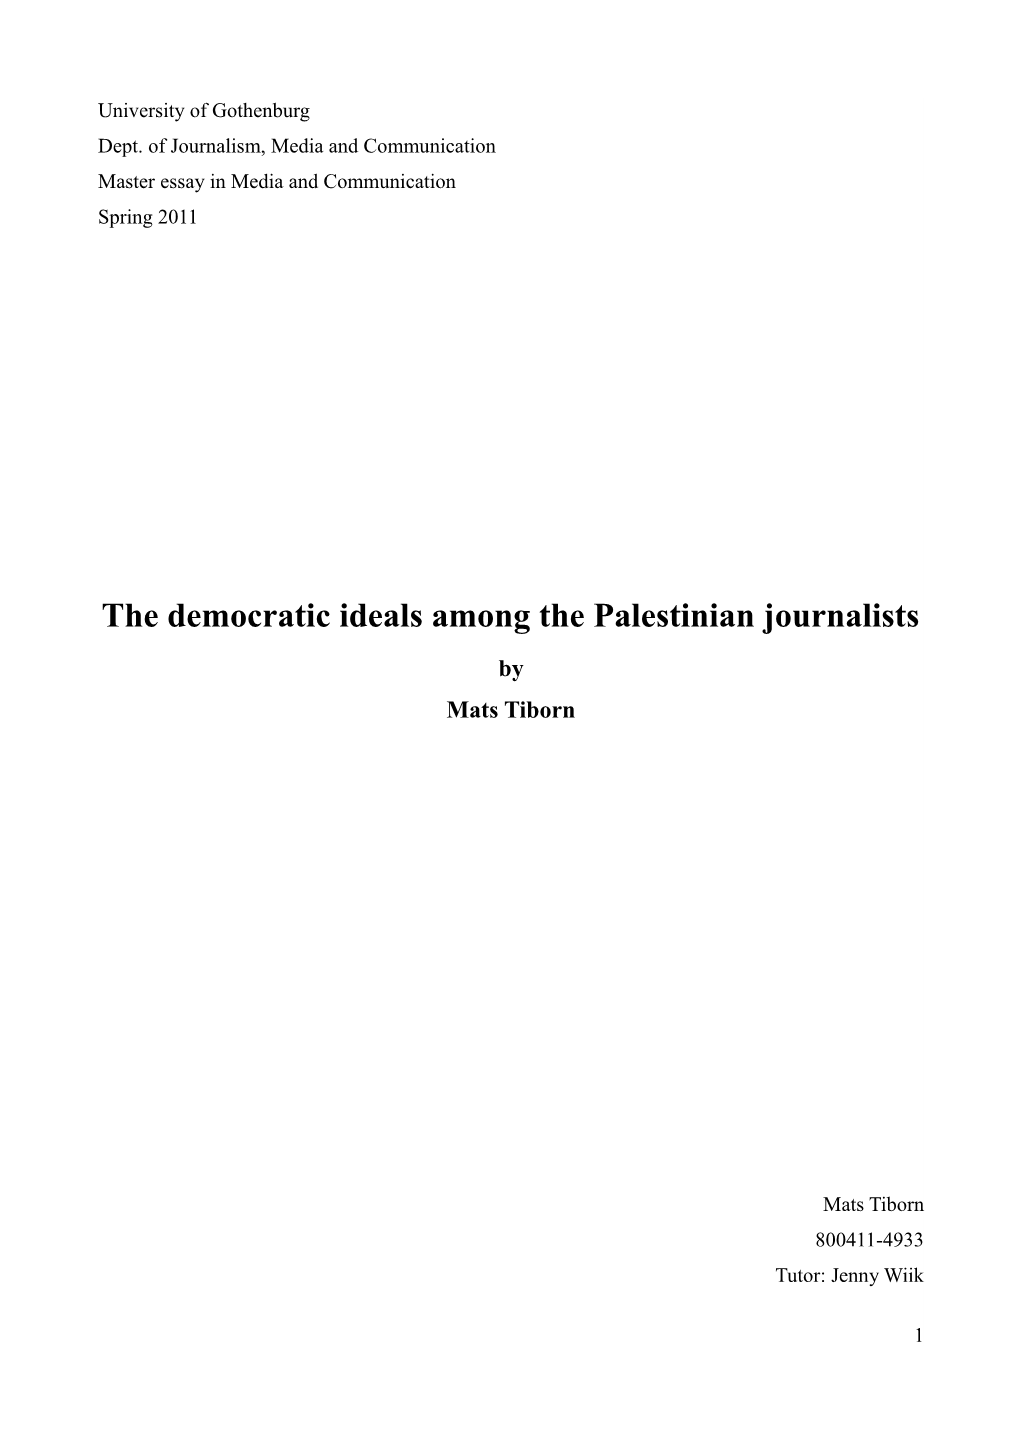 The Democratic Ideals Among the Palestinian Journalists by Mats Tiborn